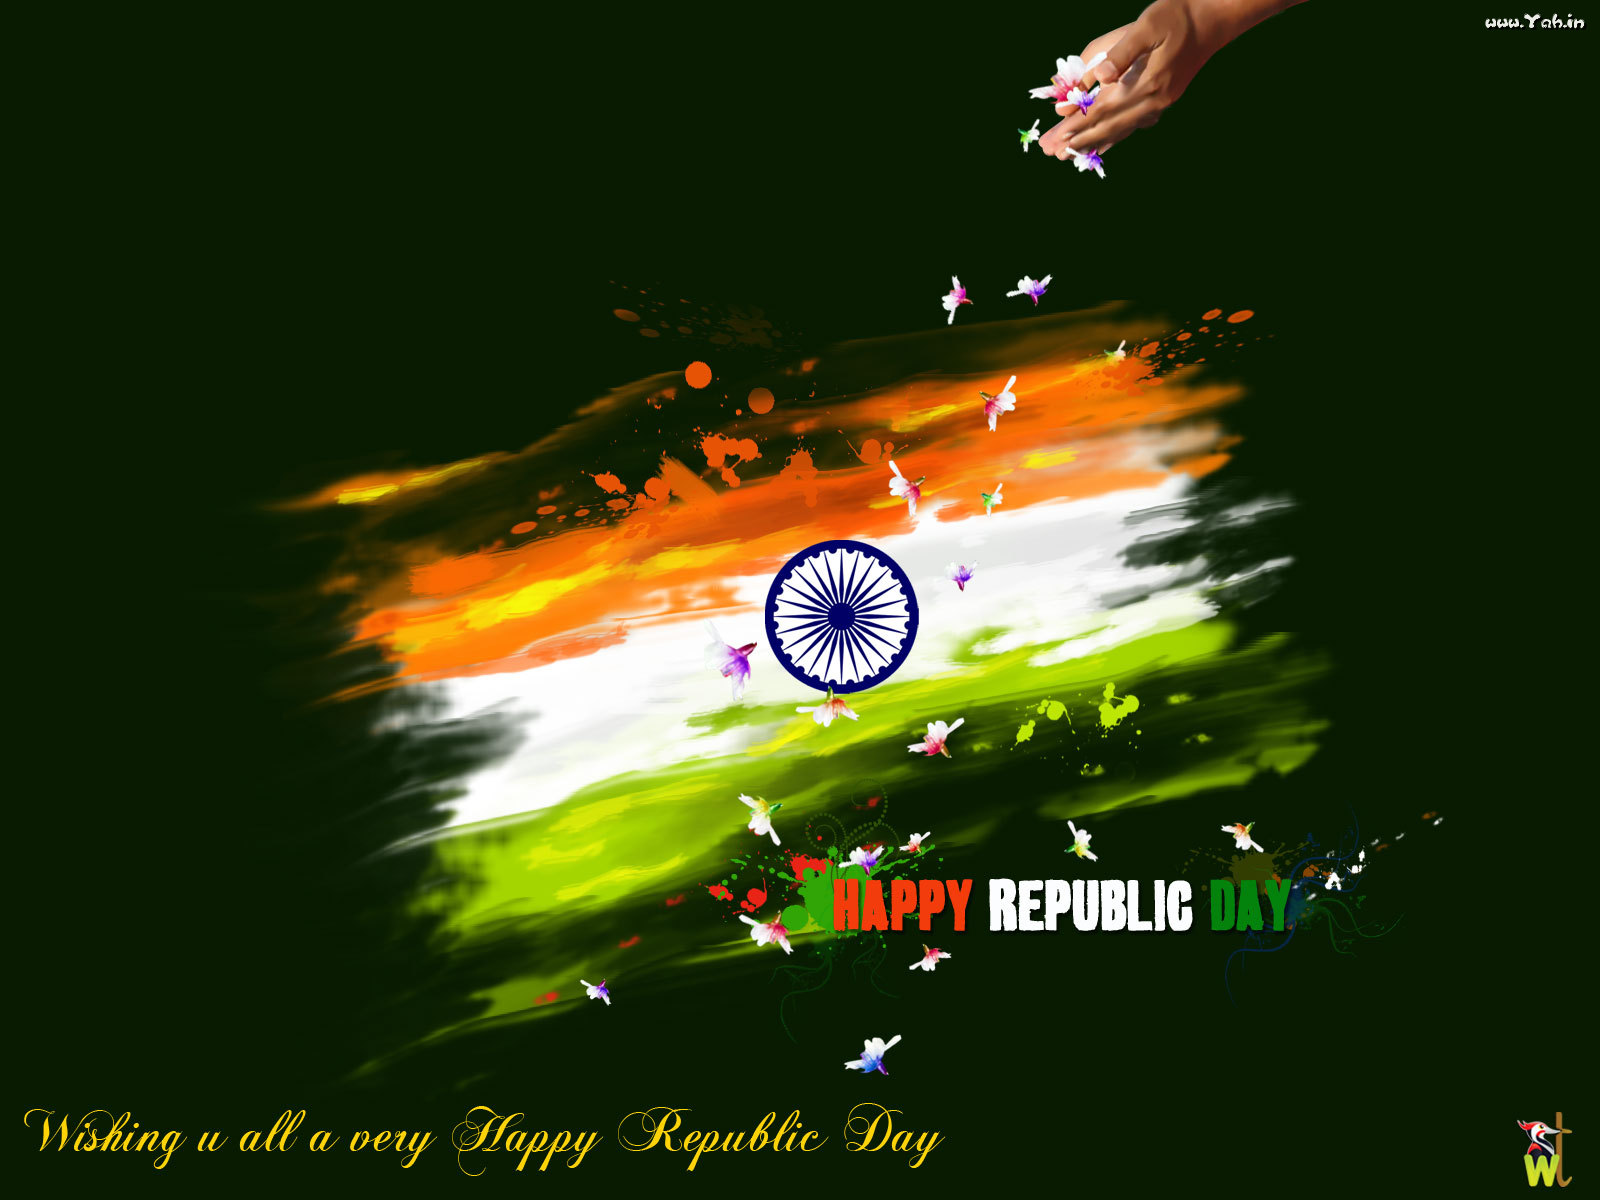 Of HD Patriotic Indian Wallpaper For Independence Day Them